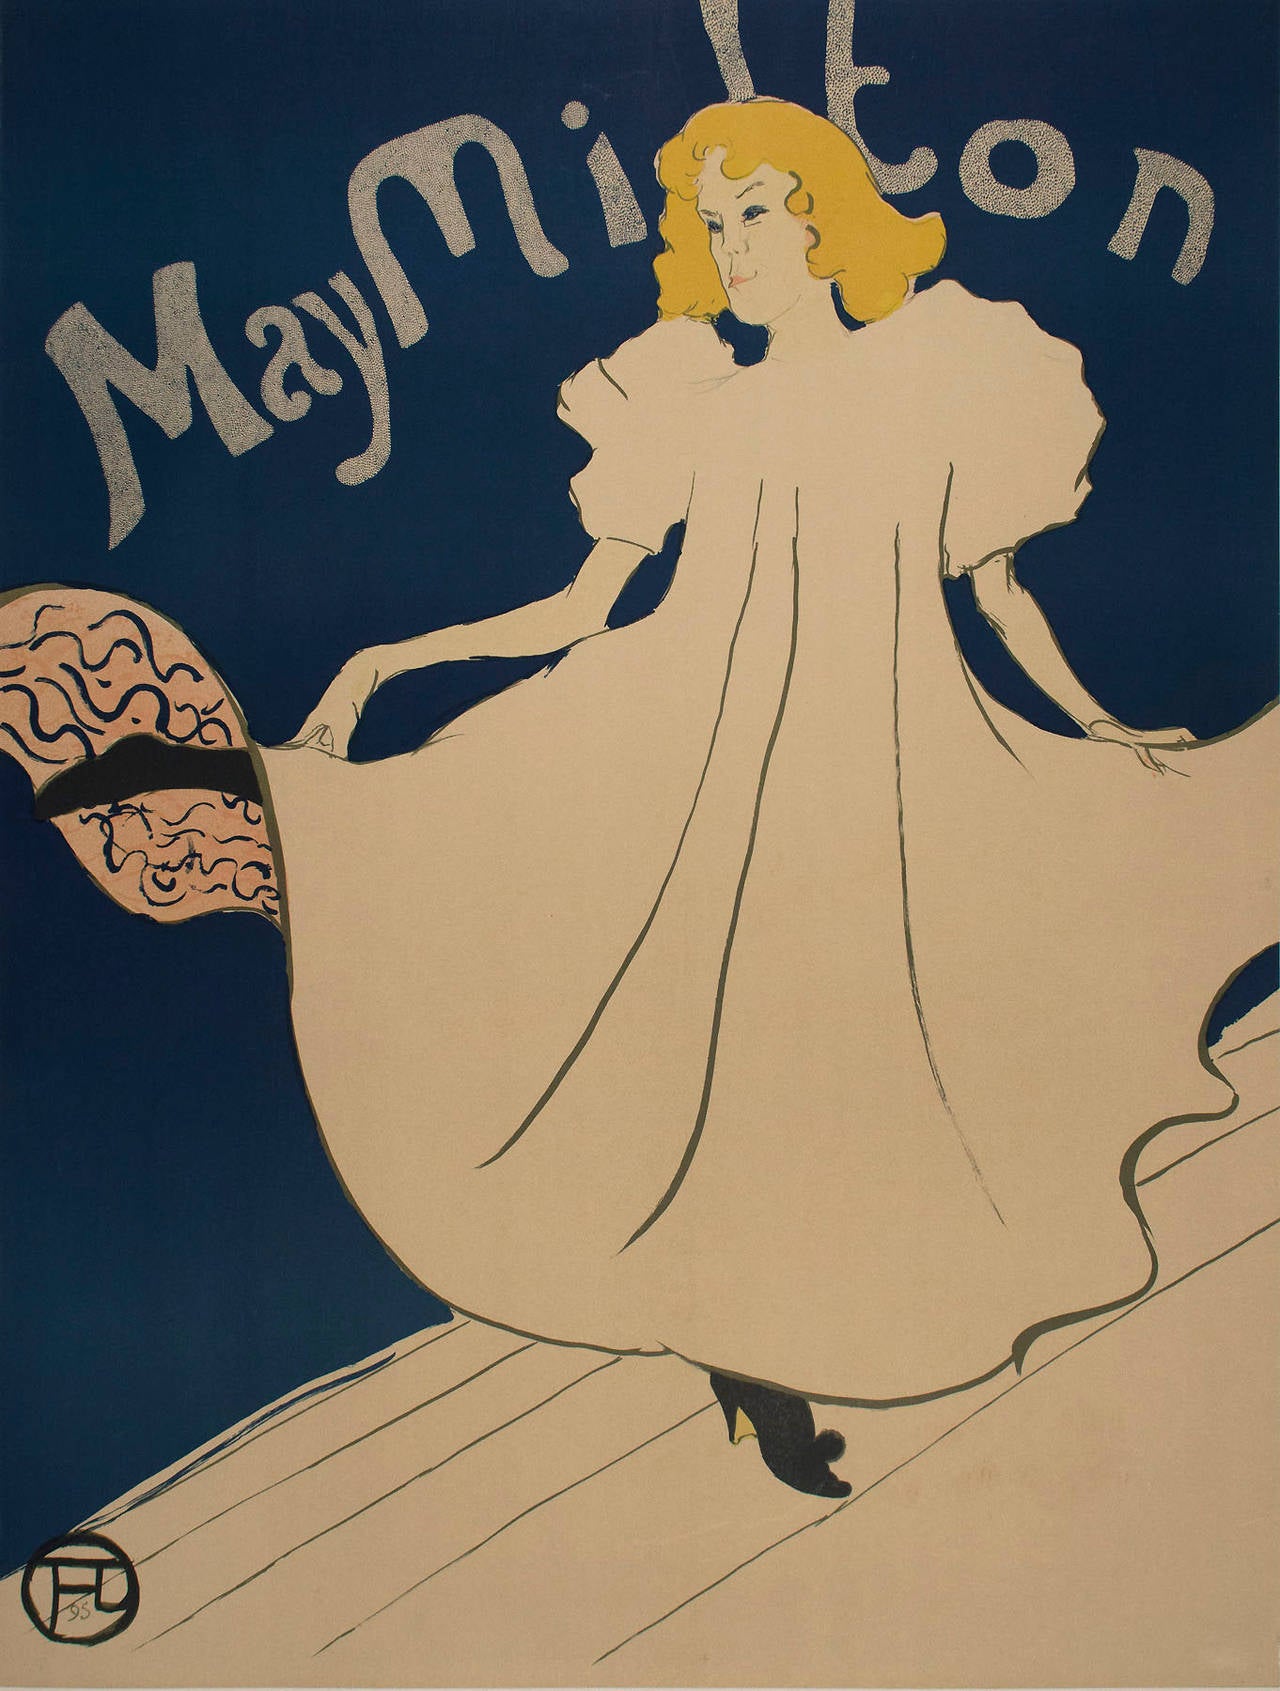 This elegant and simple poster by Toulouse-Lautrec of the young English performer, May Milton, was commissioned for her American Tour. Despite May Milton's distinctive lack of talent, the inherent technical skill of the design ensured the performer